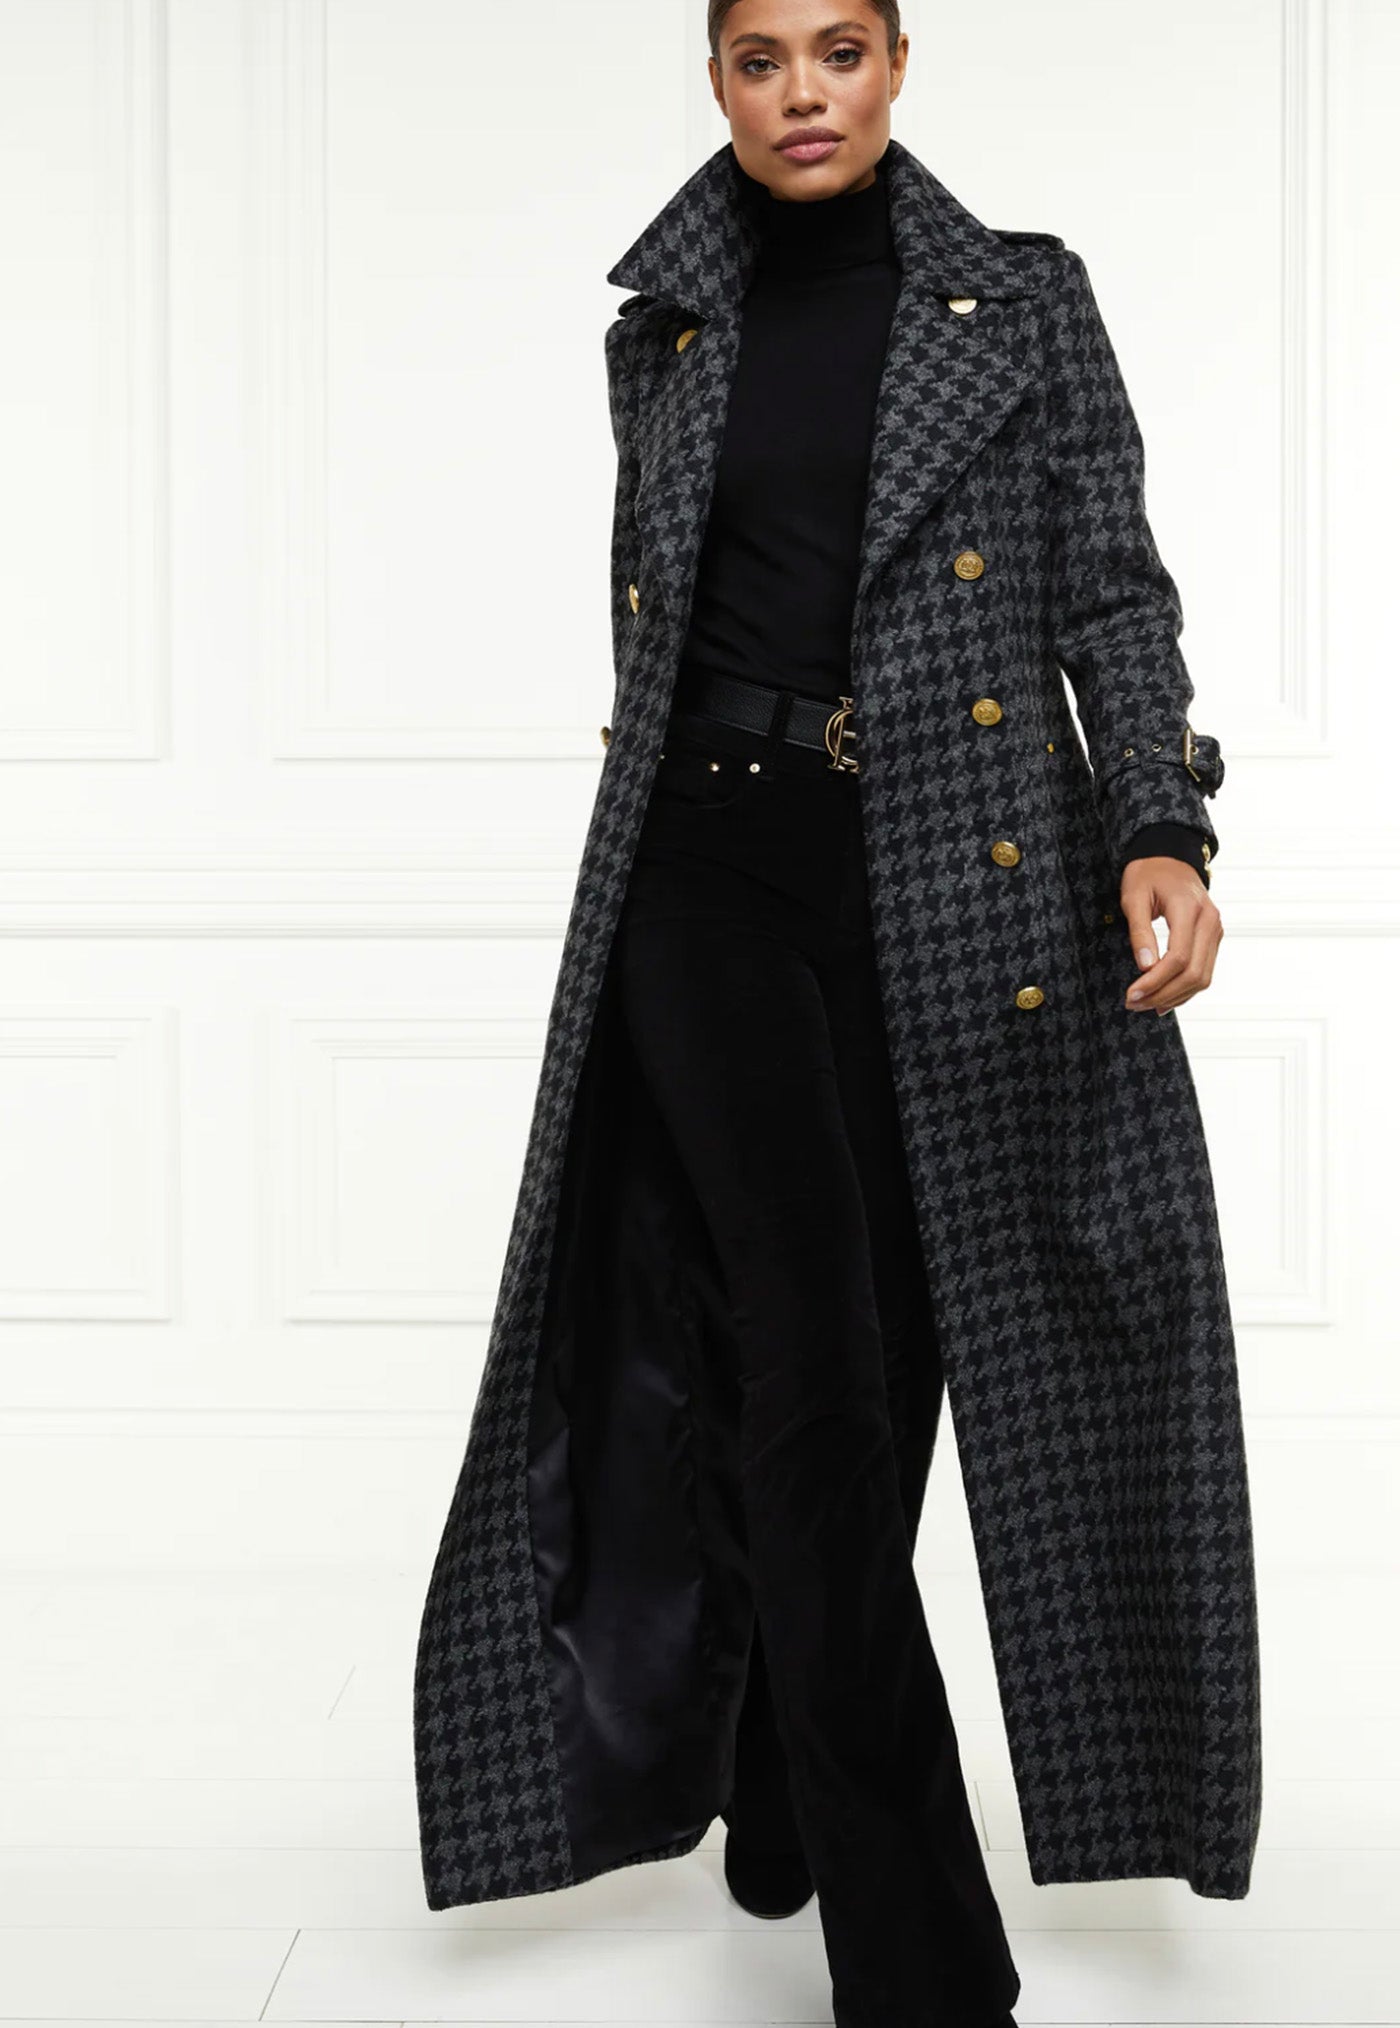 Chelsea Trench Coat Full Length - Charcoal Houndstooth sold by Angel Divine